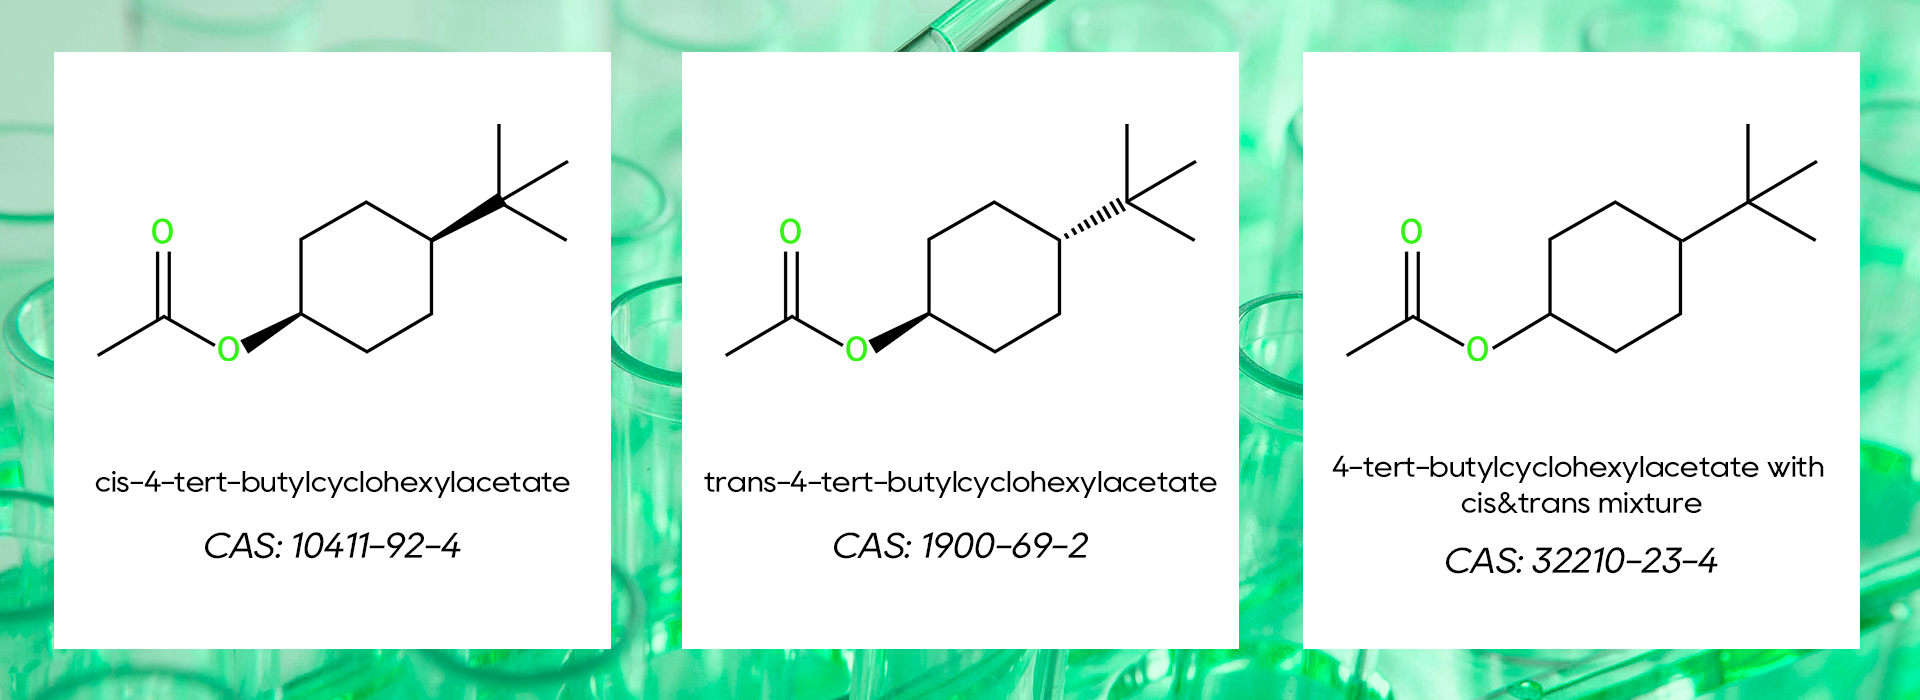 Launched! High-purity woody acetate (cis-4-tert-butylcyclohexylacetate)